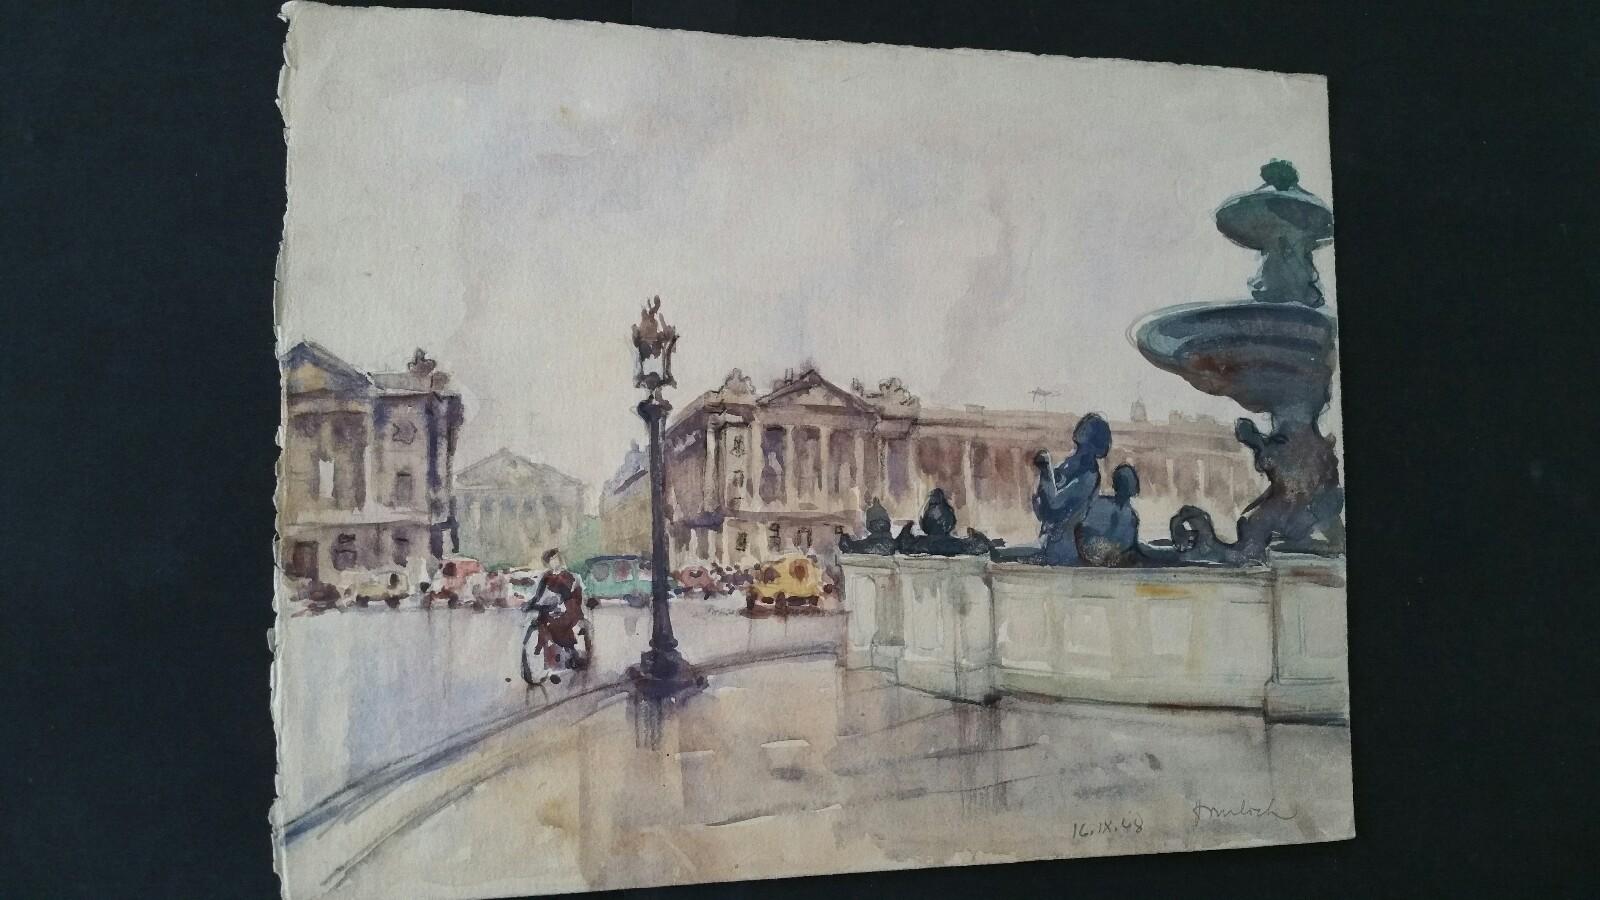 Paris: Place de la Concorde looking towards Rue Royale
by Henri Miloch (1898-1979)
signed lower right and dated for 16th September 1948
watercolour and gouache painting on artist's paper, unframed

Sheet:: 9.5 x 12.25 inches

Very pretty painting by